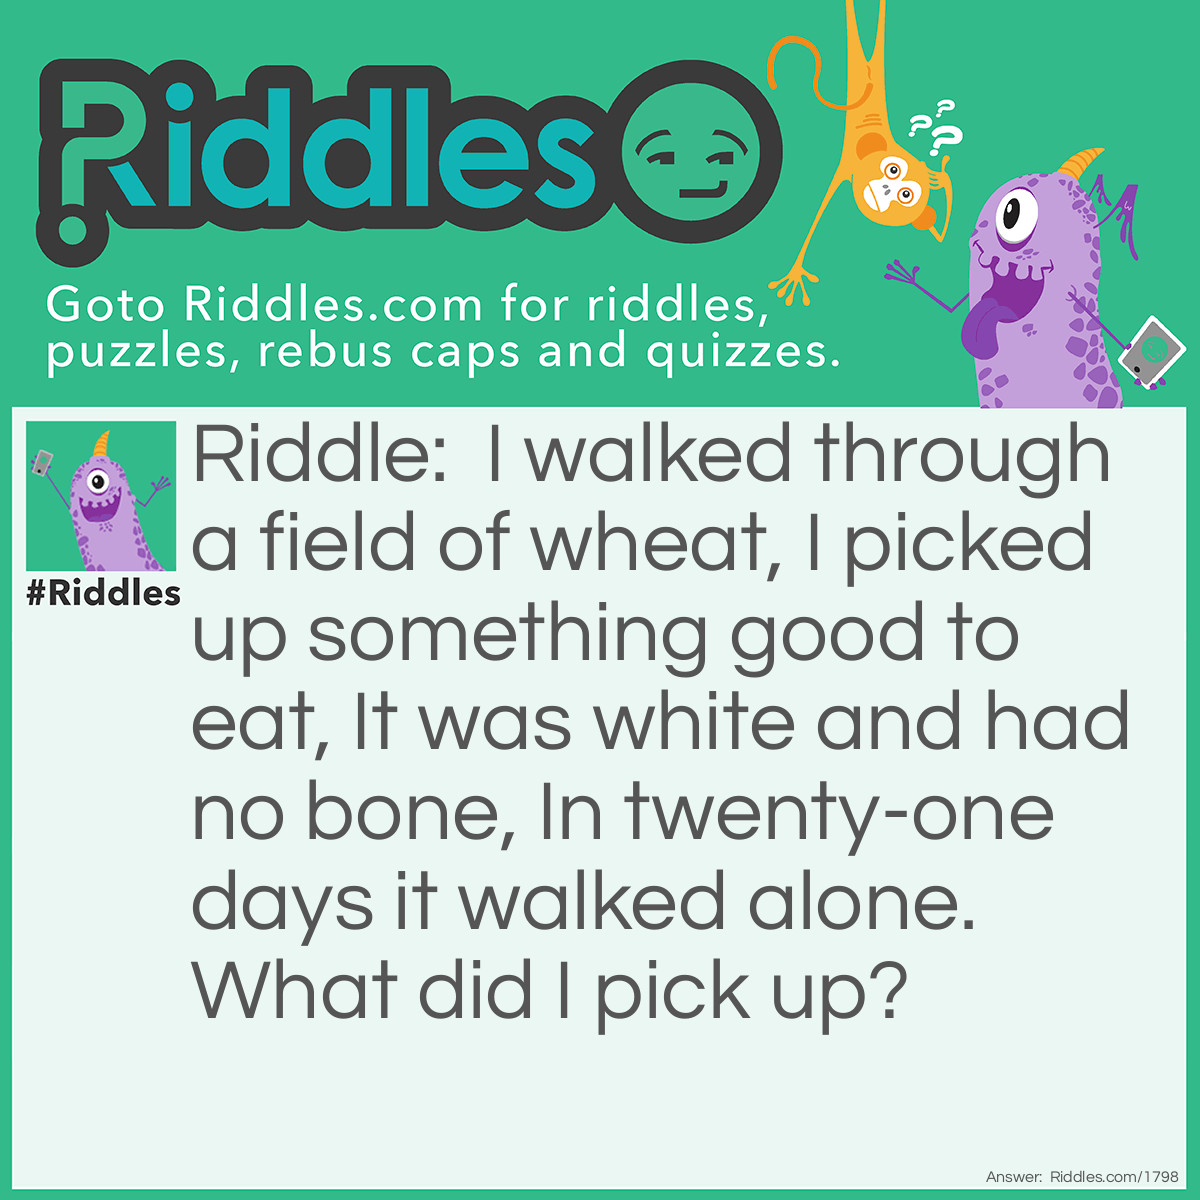 Riddle: I walked through a field of wheat, 
I picked up something good to eat, 
It was white and had no bone, 
In twenty-one days it walked alone. 
What did I pick up? Answer: An Egg.